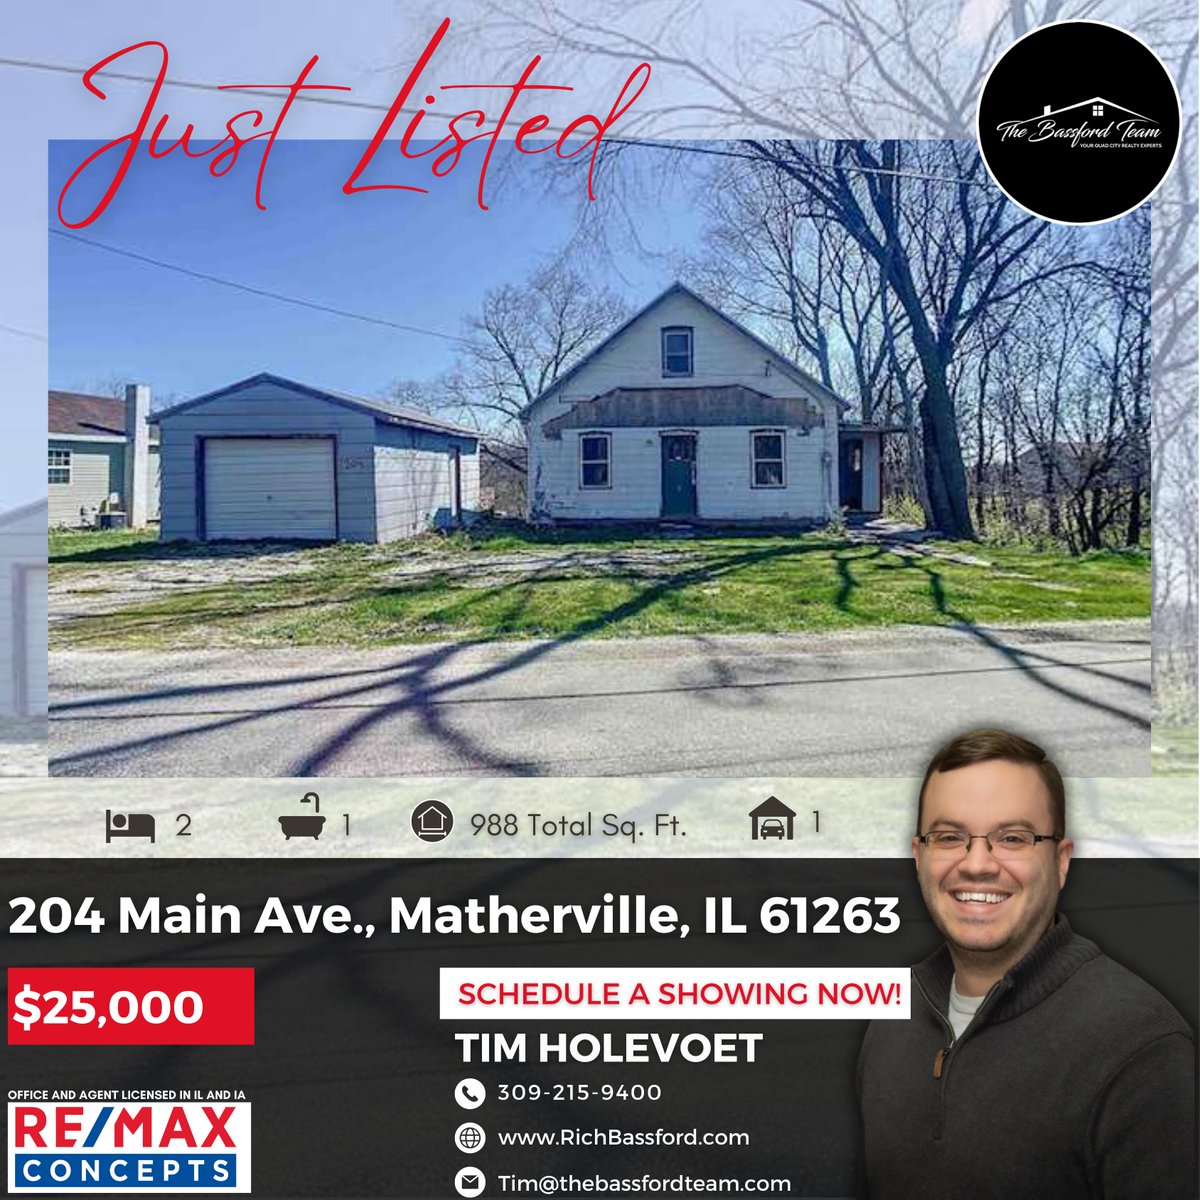 🚪 Opportunity knocks! Embark on your next project with this 2-bed, 1-bath fixer-upper in Matherville. 🛠 
..
..
🔗👉🏻👉🏻👉🏻 richbassford.com/property-searc…
..
..
#quadcitiesrealtor #quadcitieshomesforsale #qcproperties #Mathervillehomesforsale #remaxconcepts #thebassfordteam #richbassford